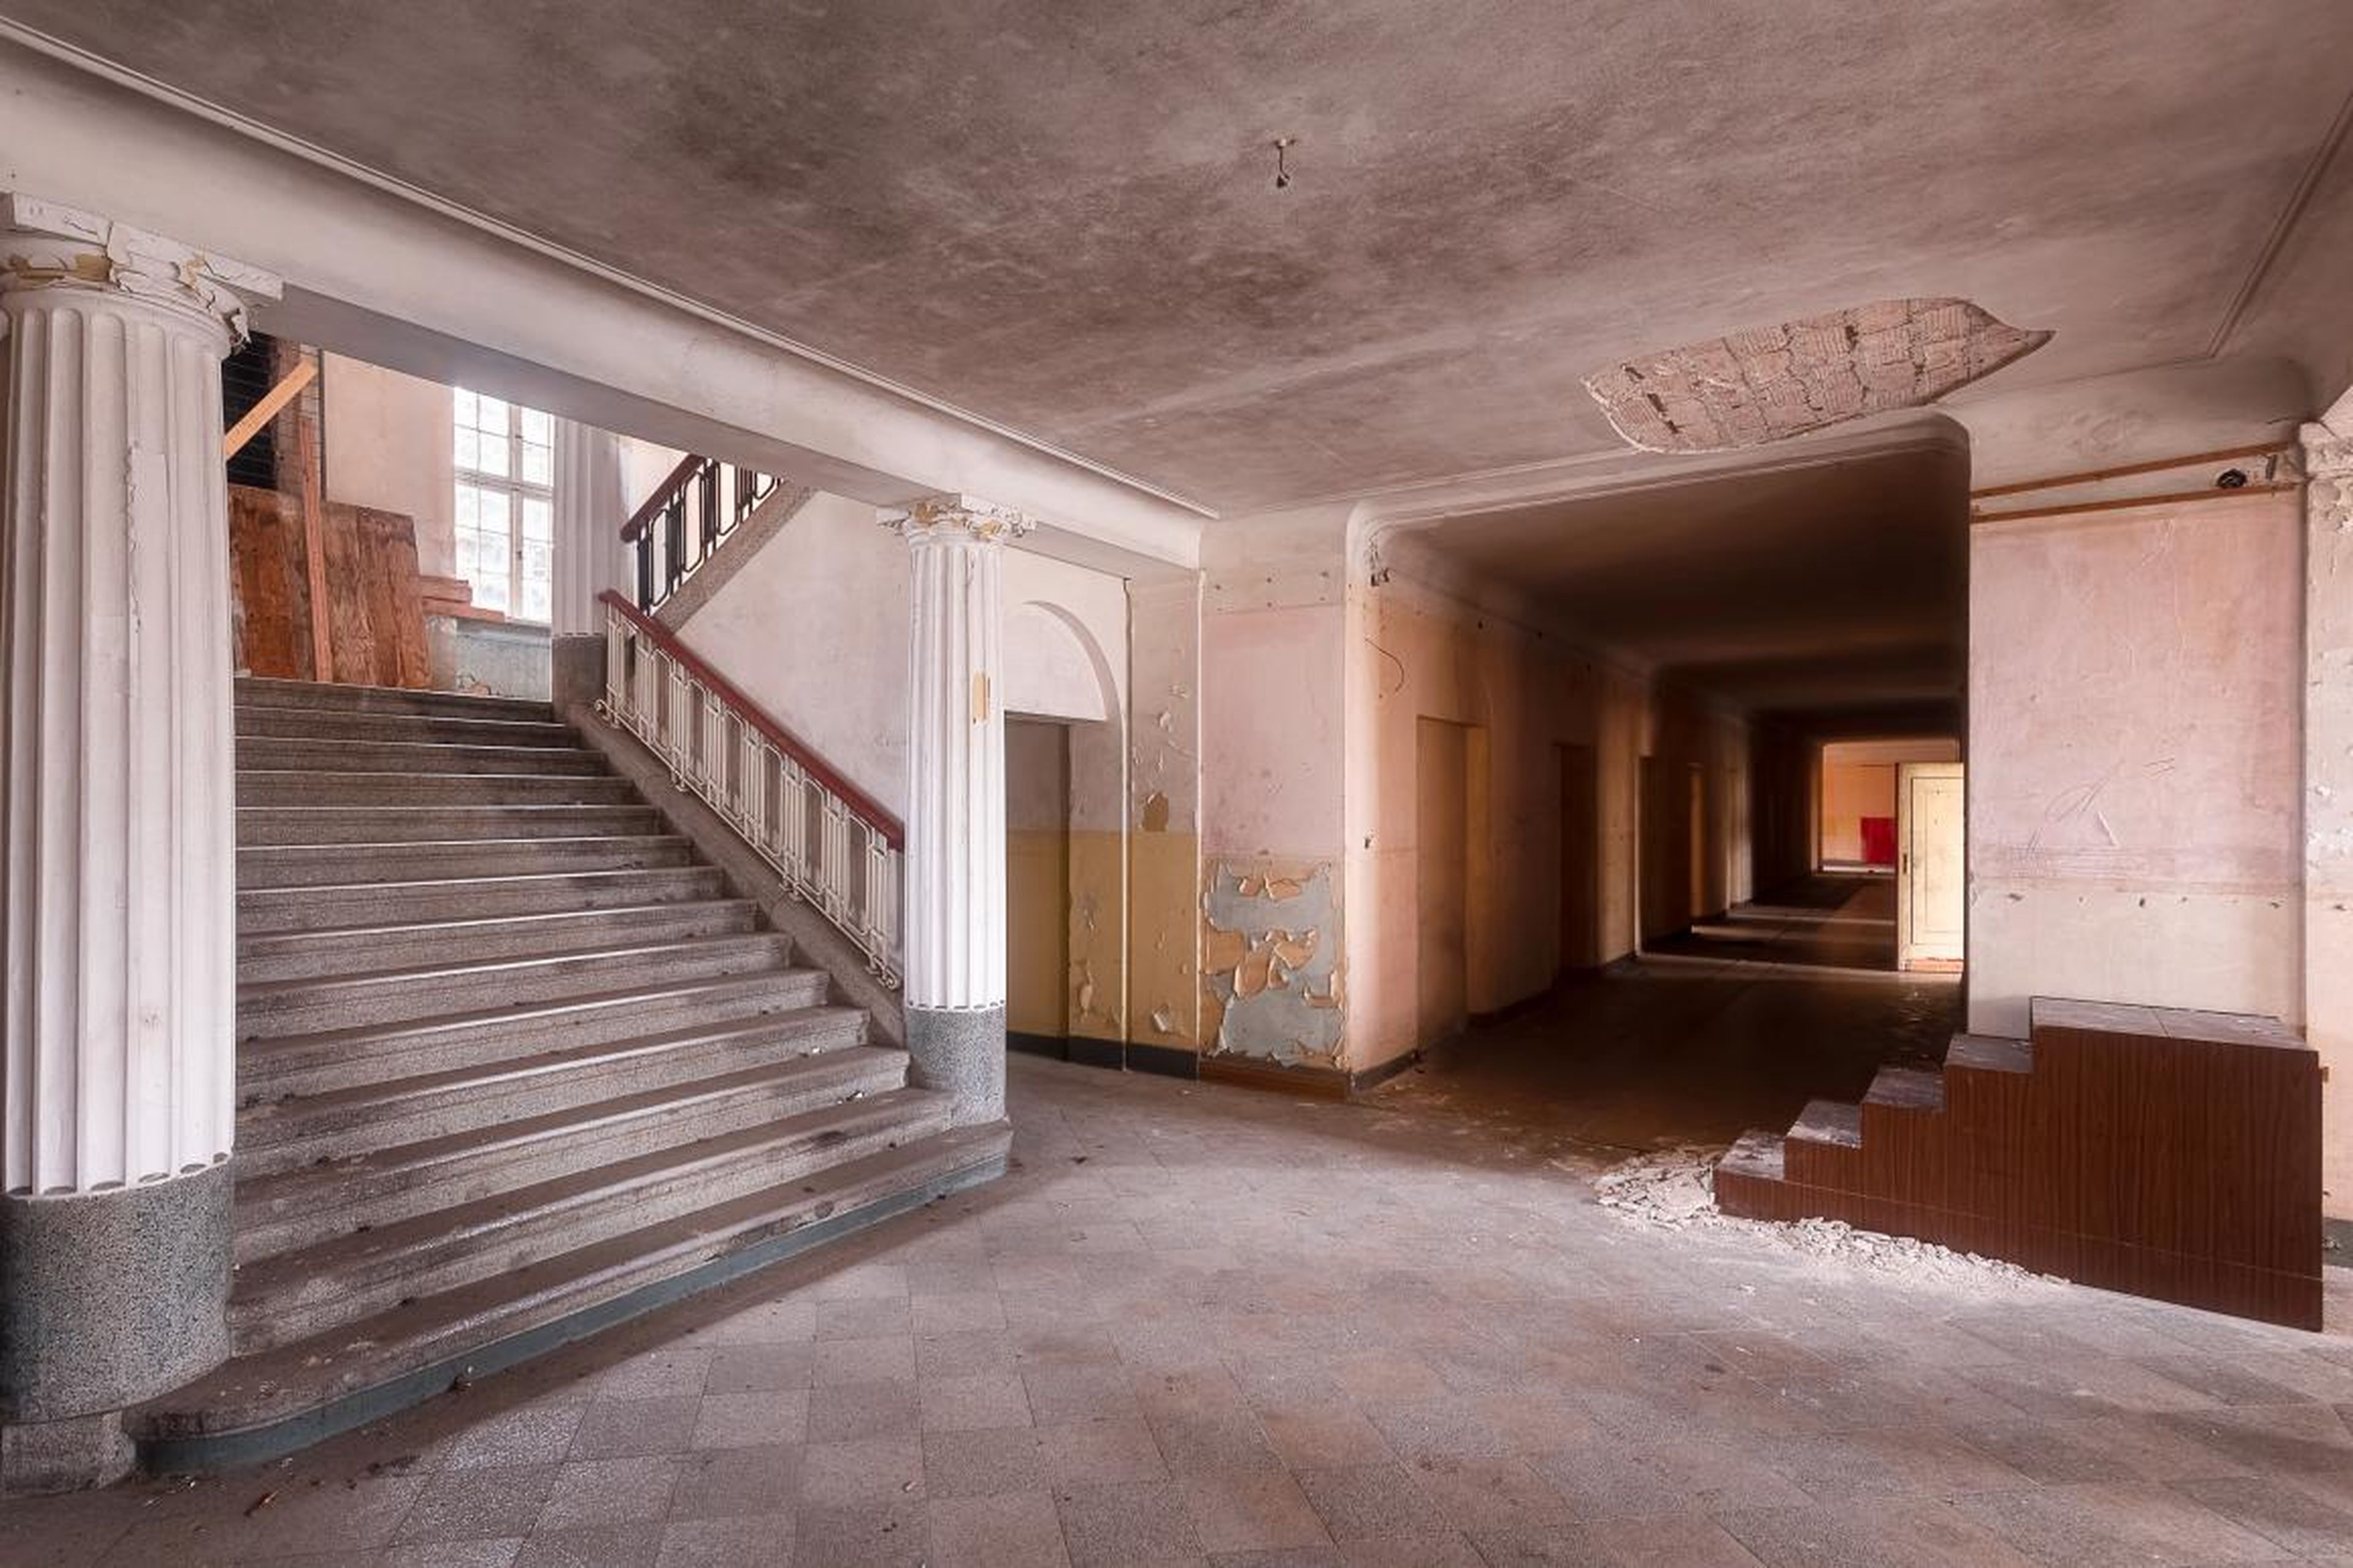 The neglect of 25 years was evident in connecting rooms like this one. The base hasn't been used since the last Soviet soldiers left in 1994.